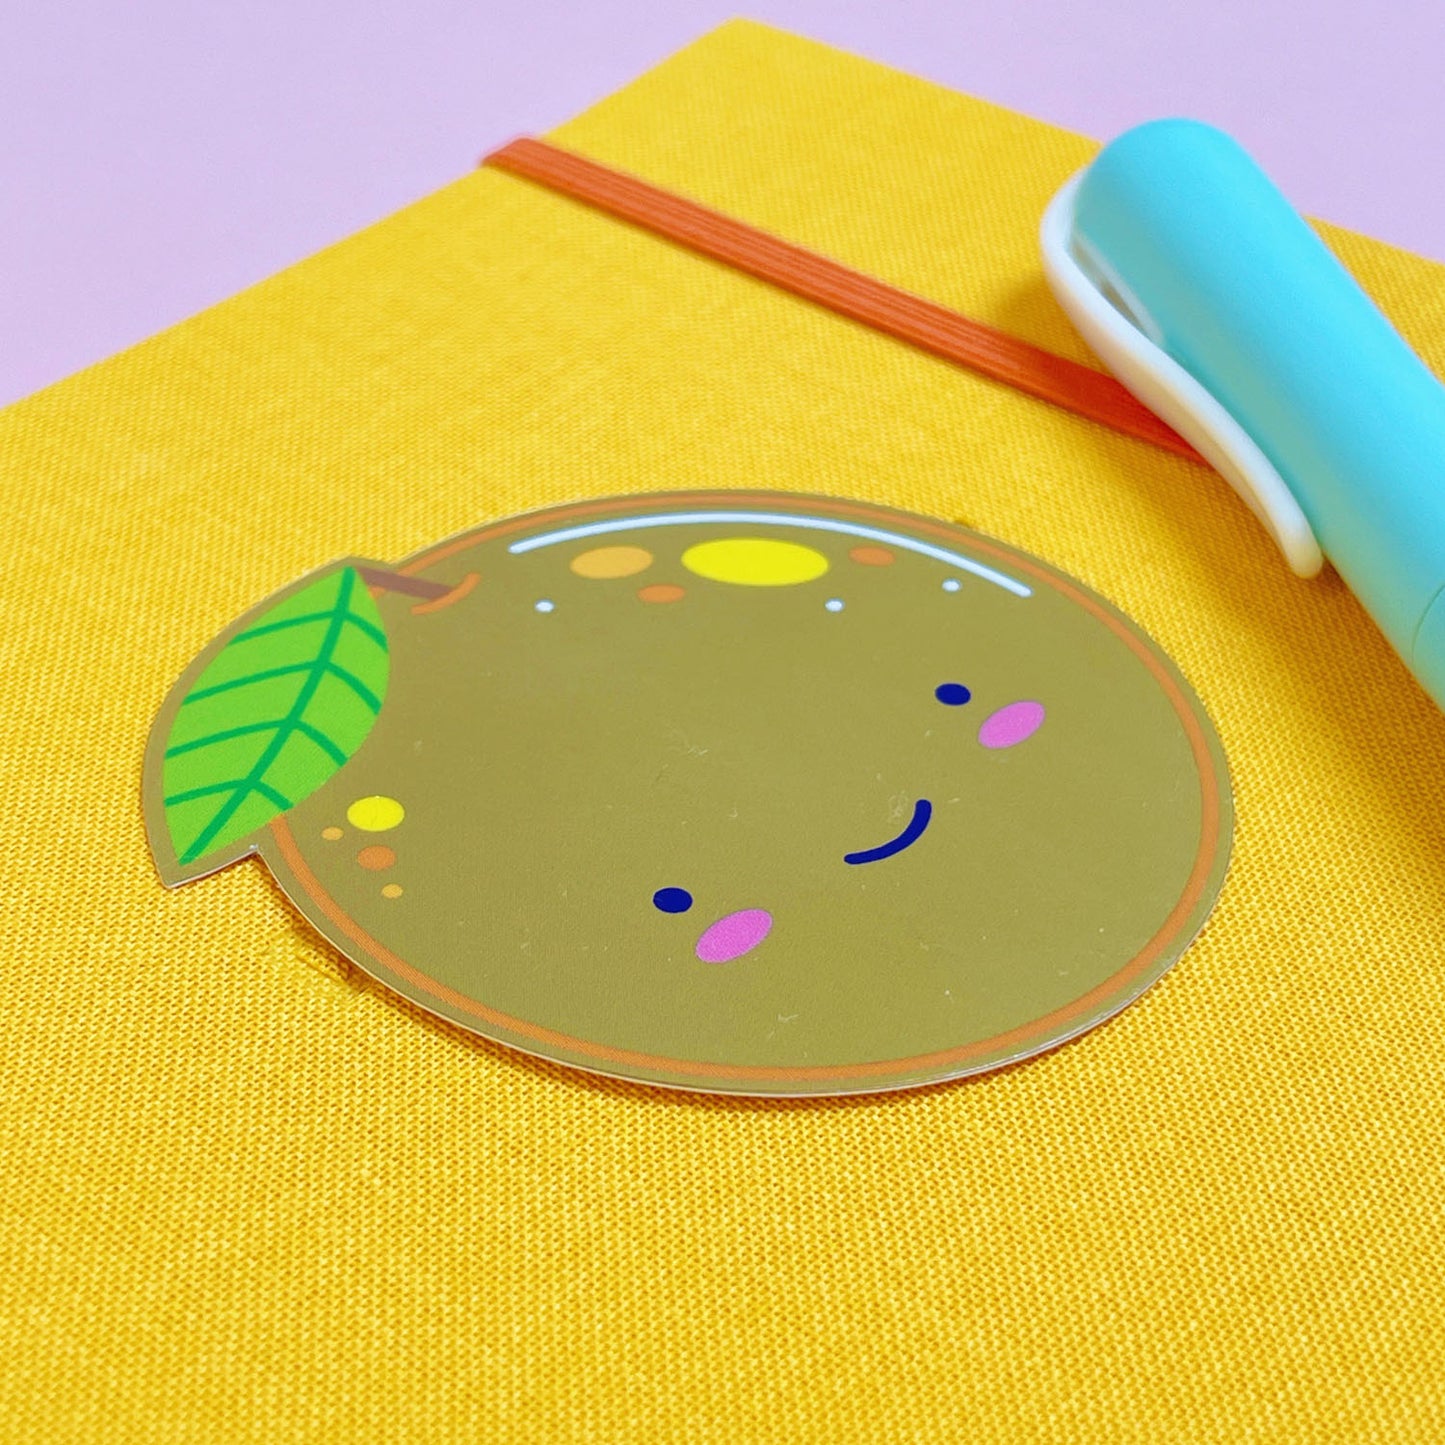 A shiny mirror effect gold sticker featuring a smiling orange lying on top of a yellow journal on a pink background